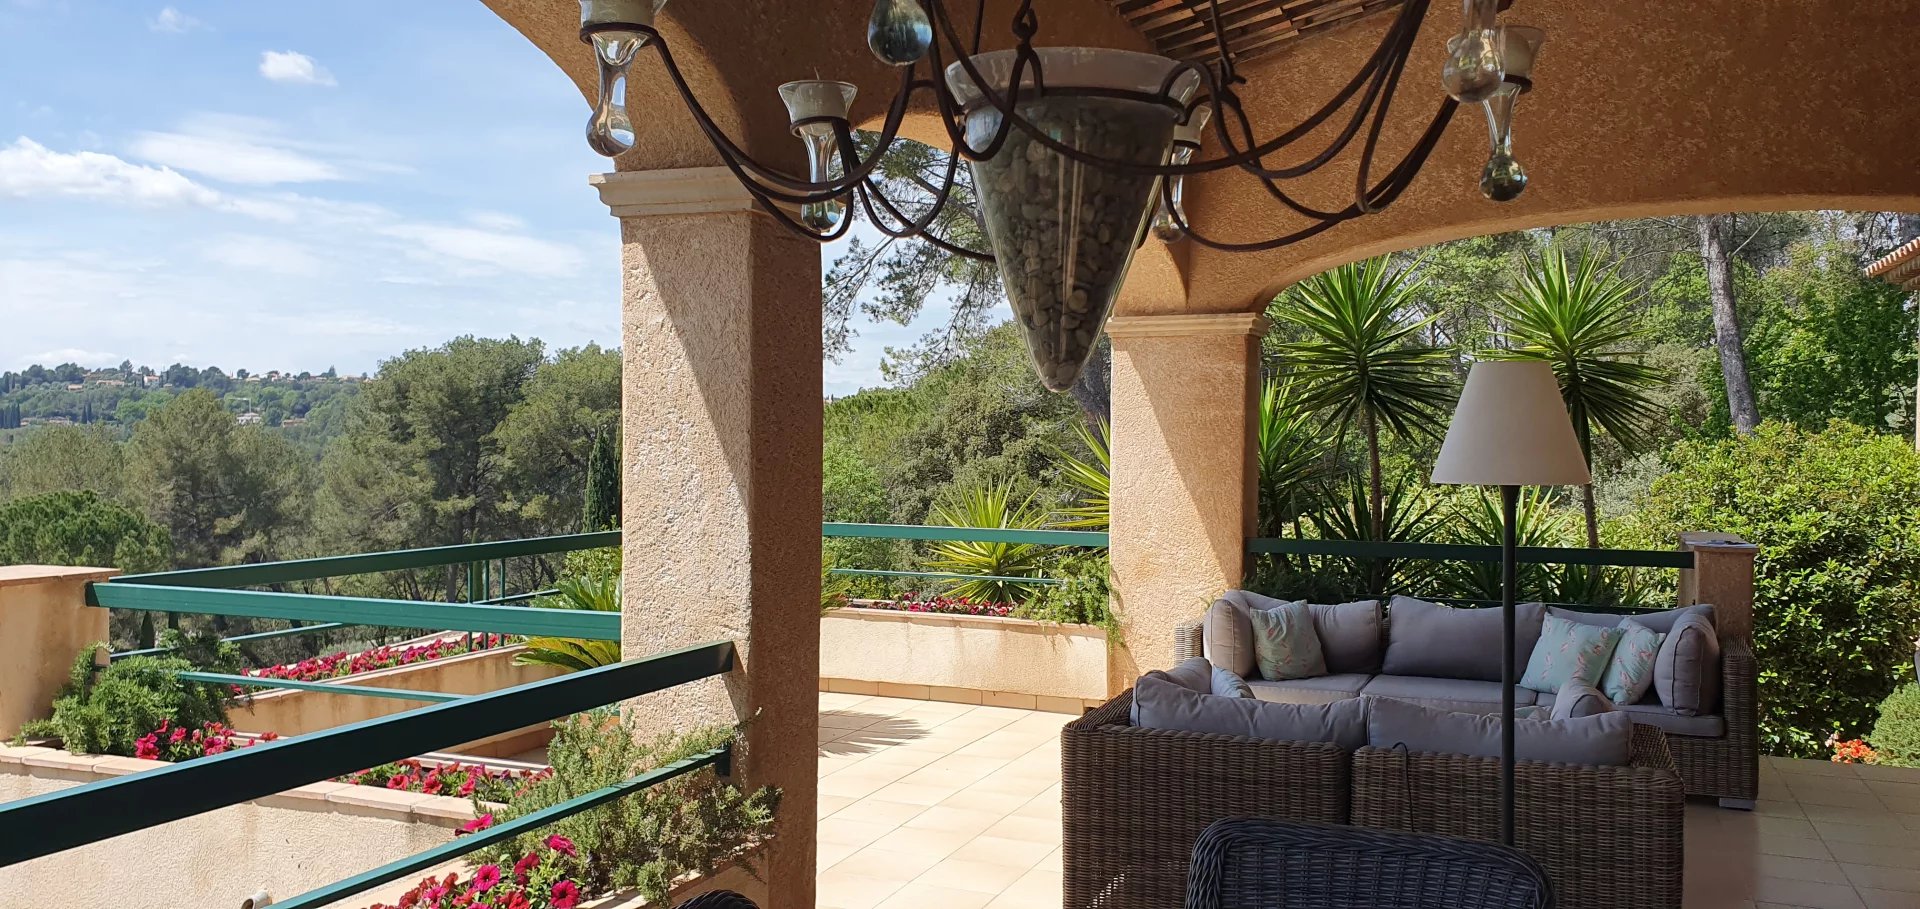 Villa with view. 4 Bedrooms, swimming pool. Close to Flayosc.